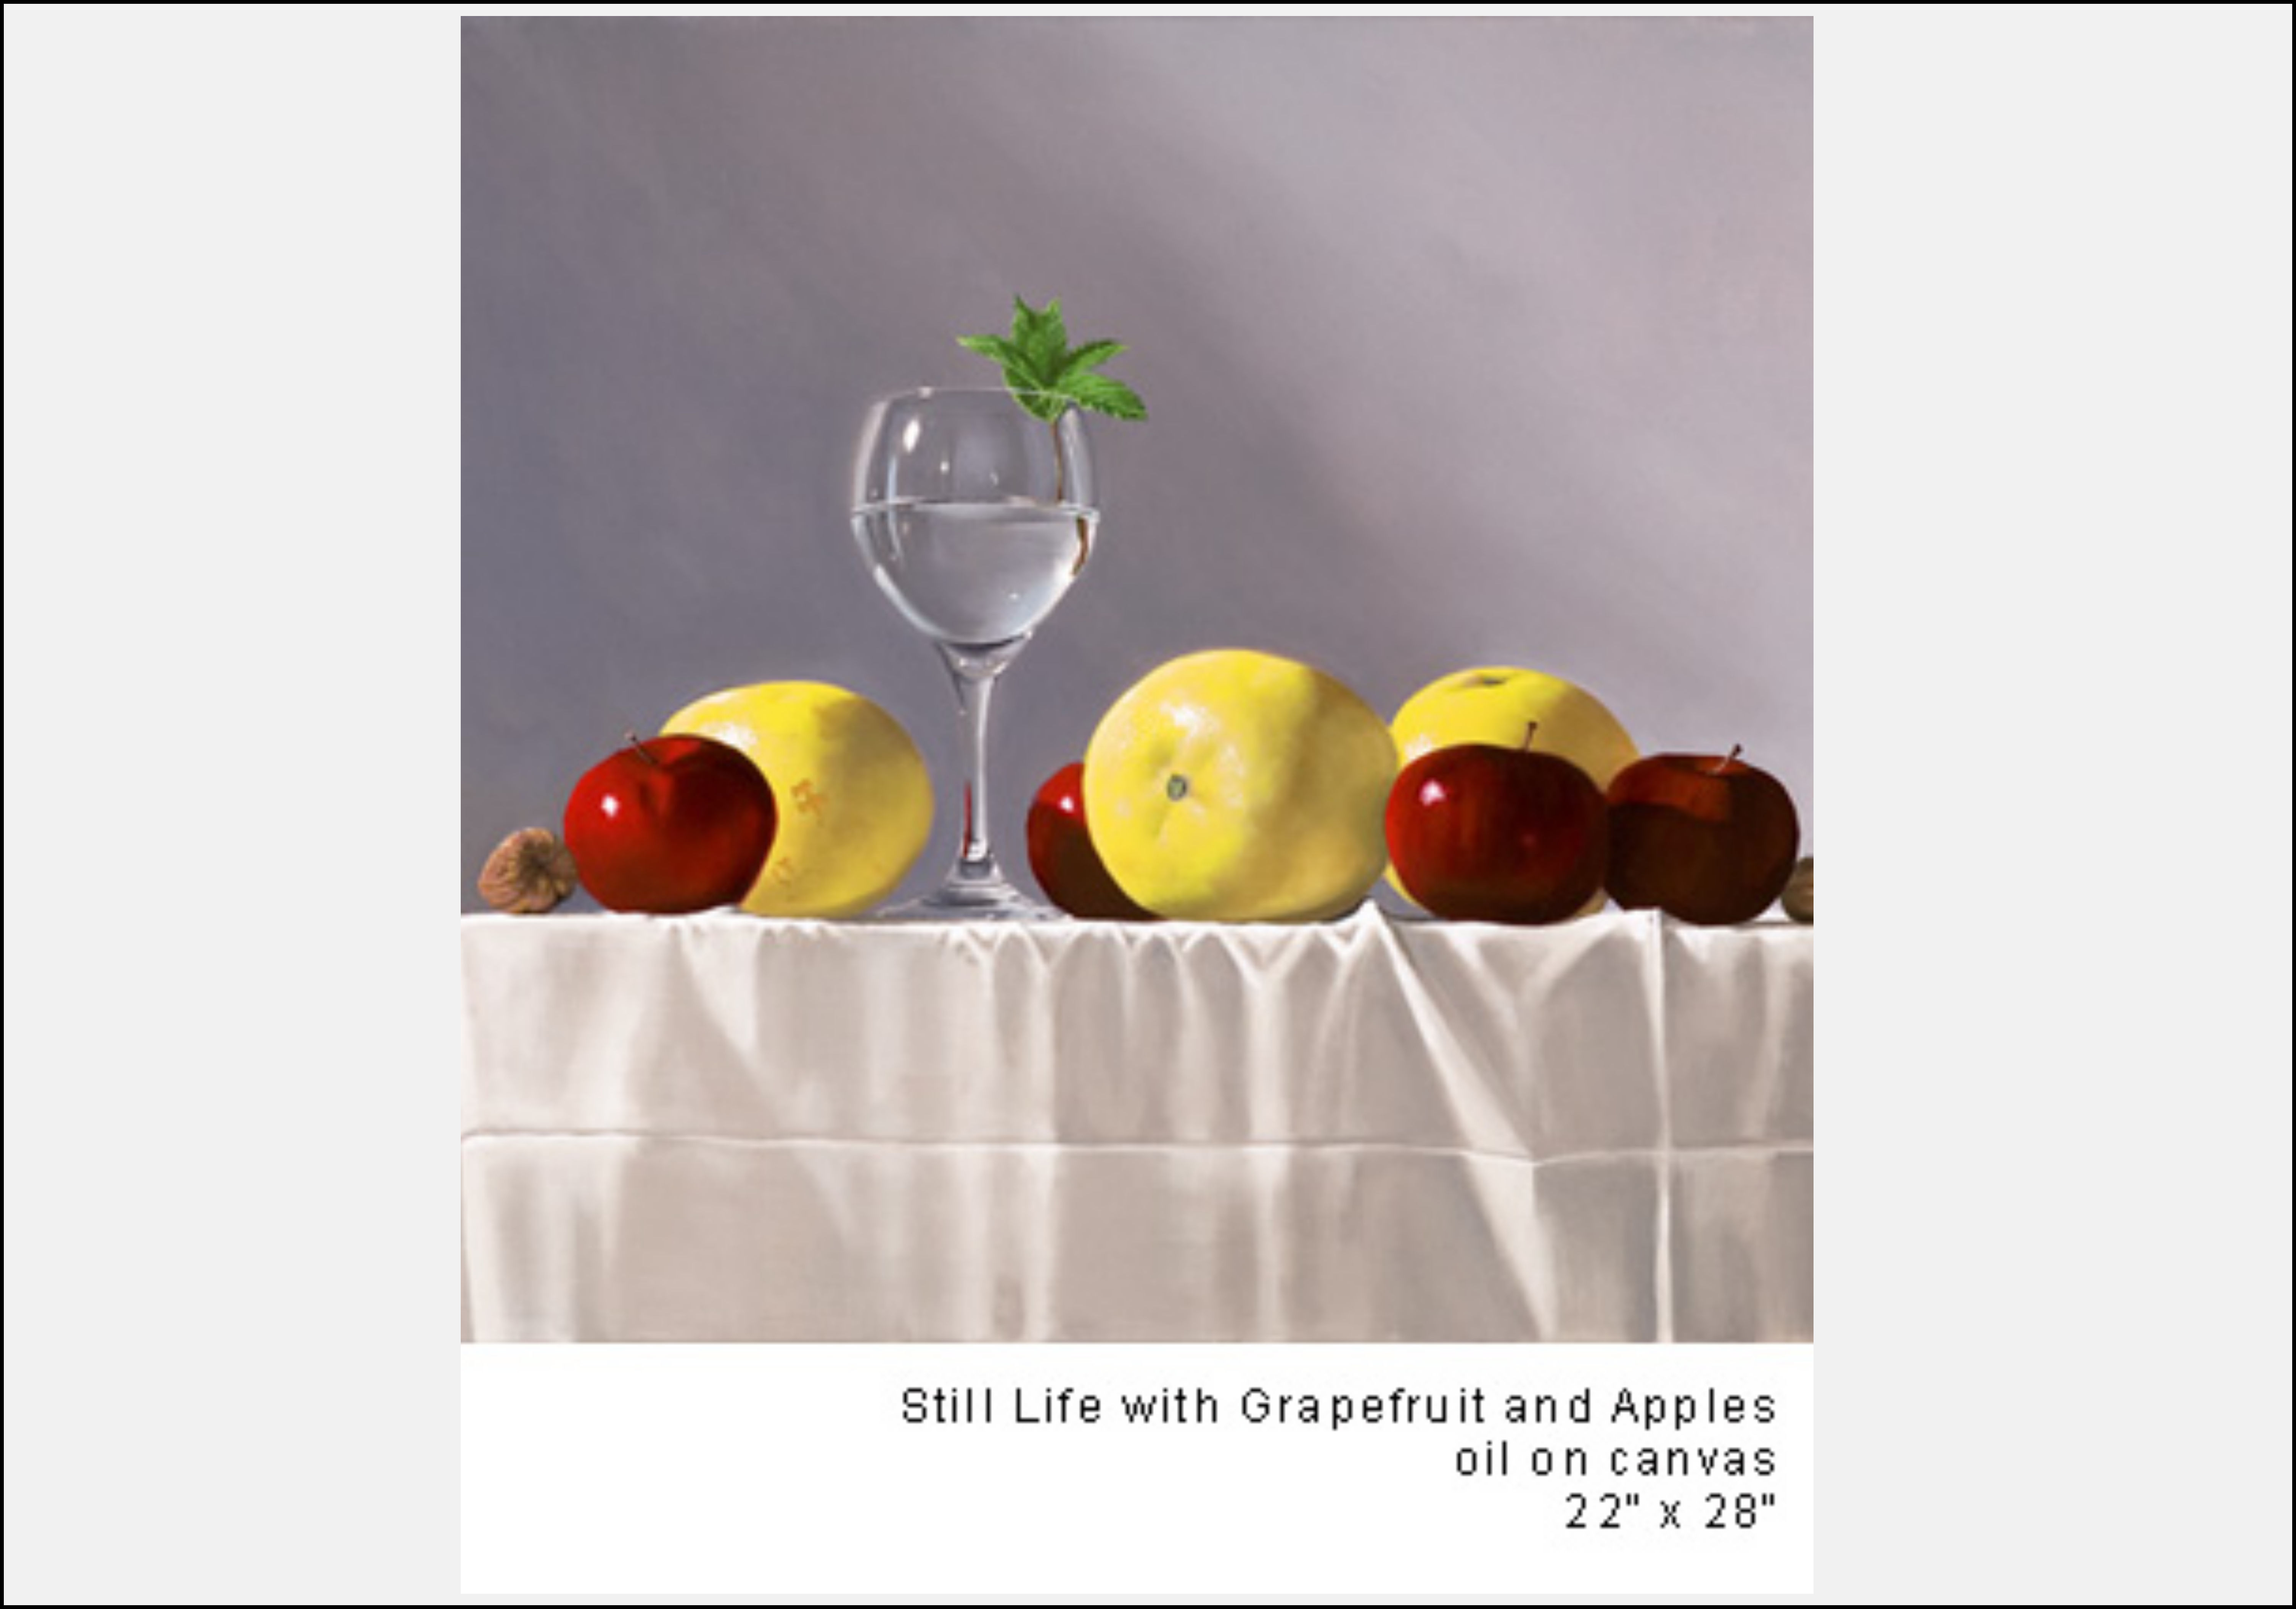 Still Life with Grapefruit and Apples